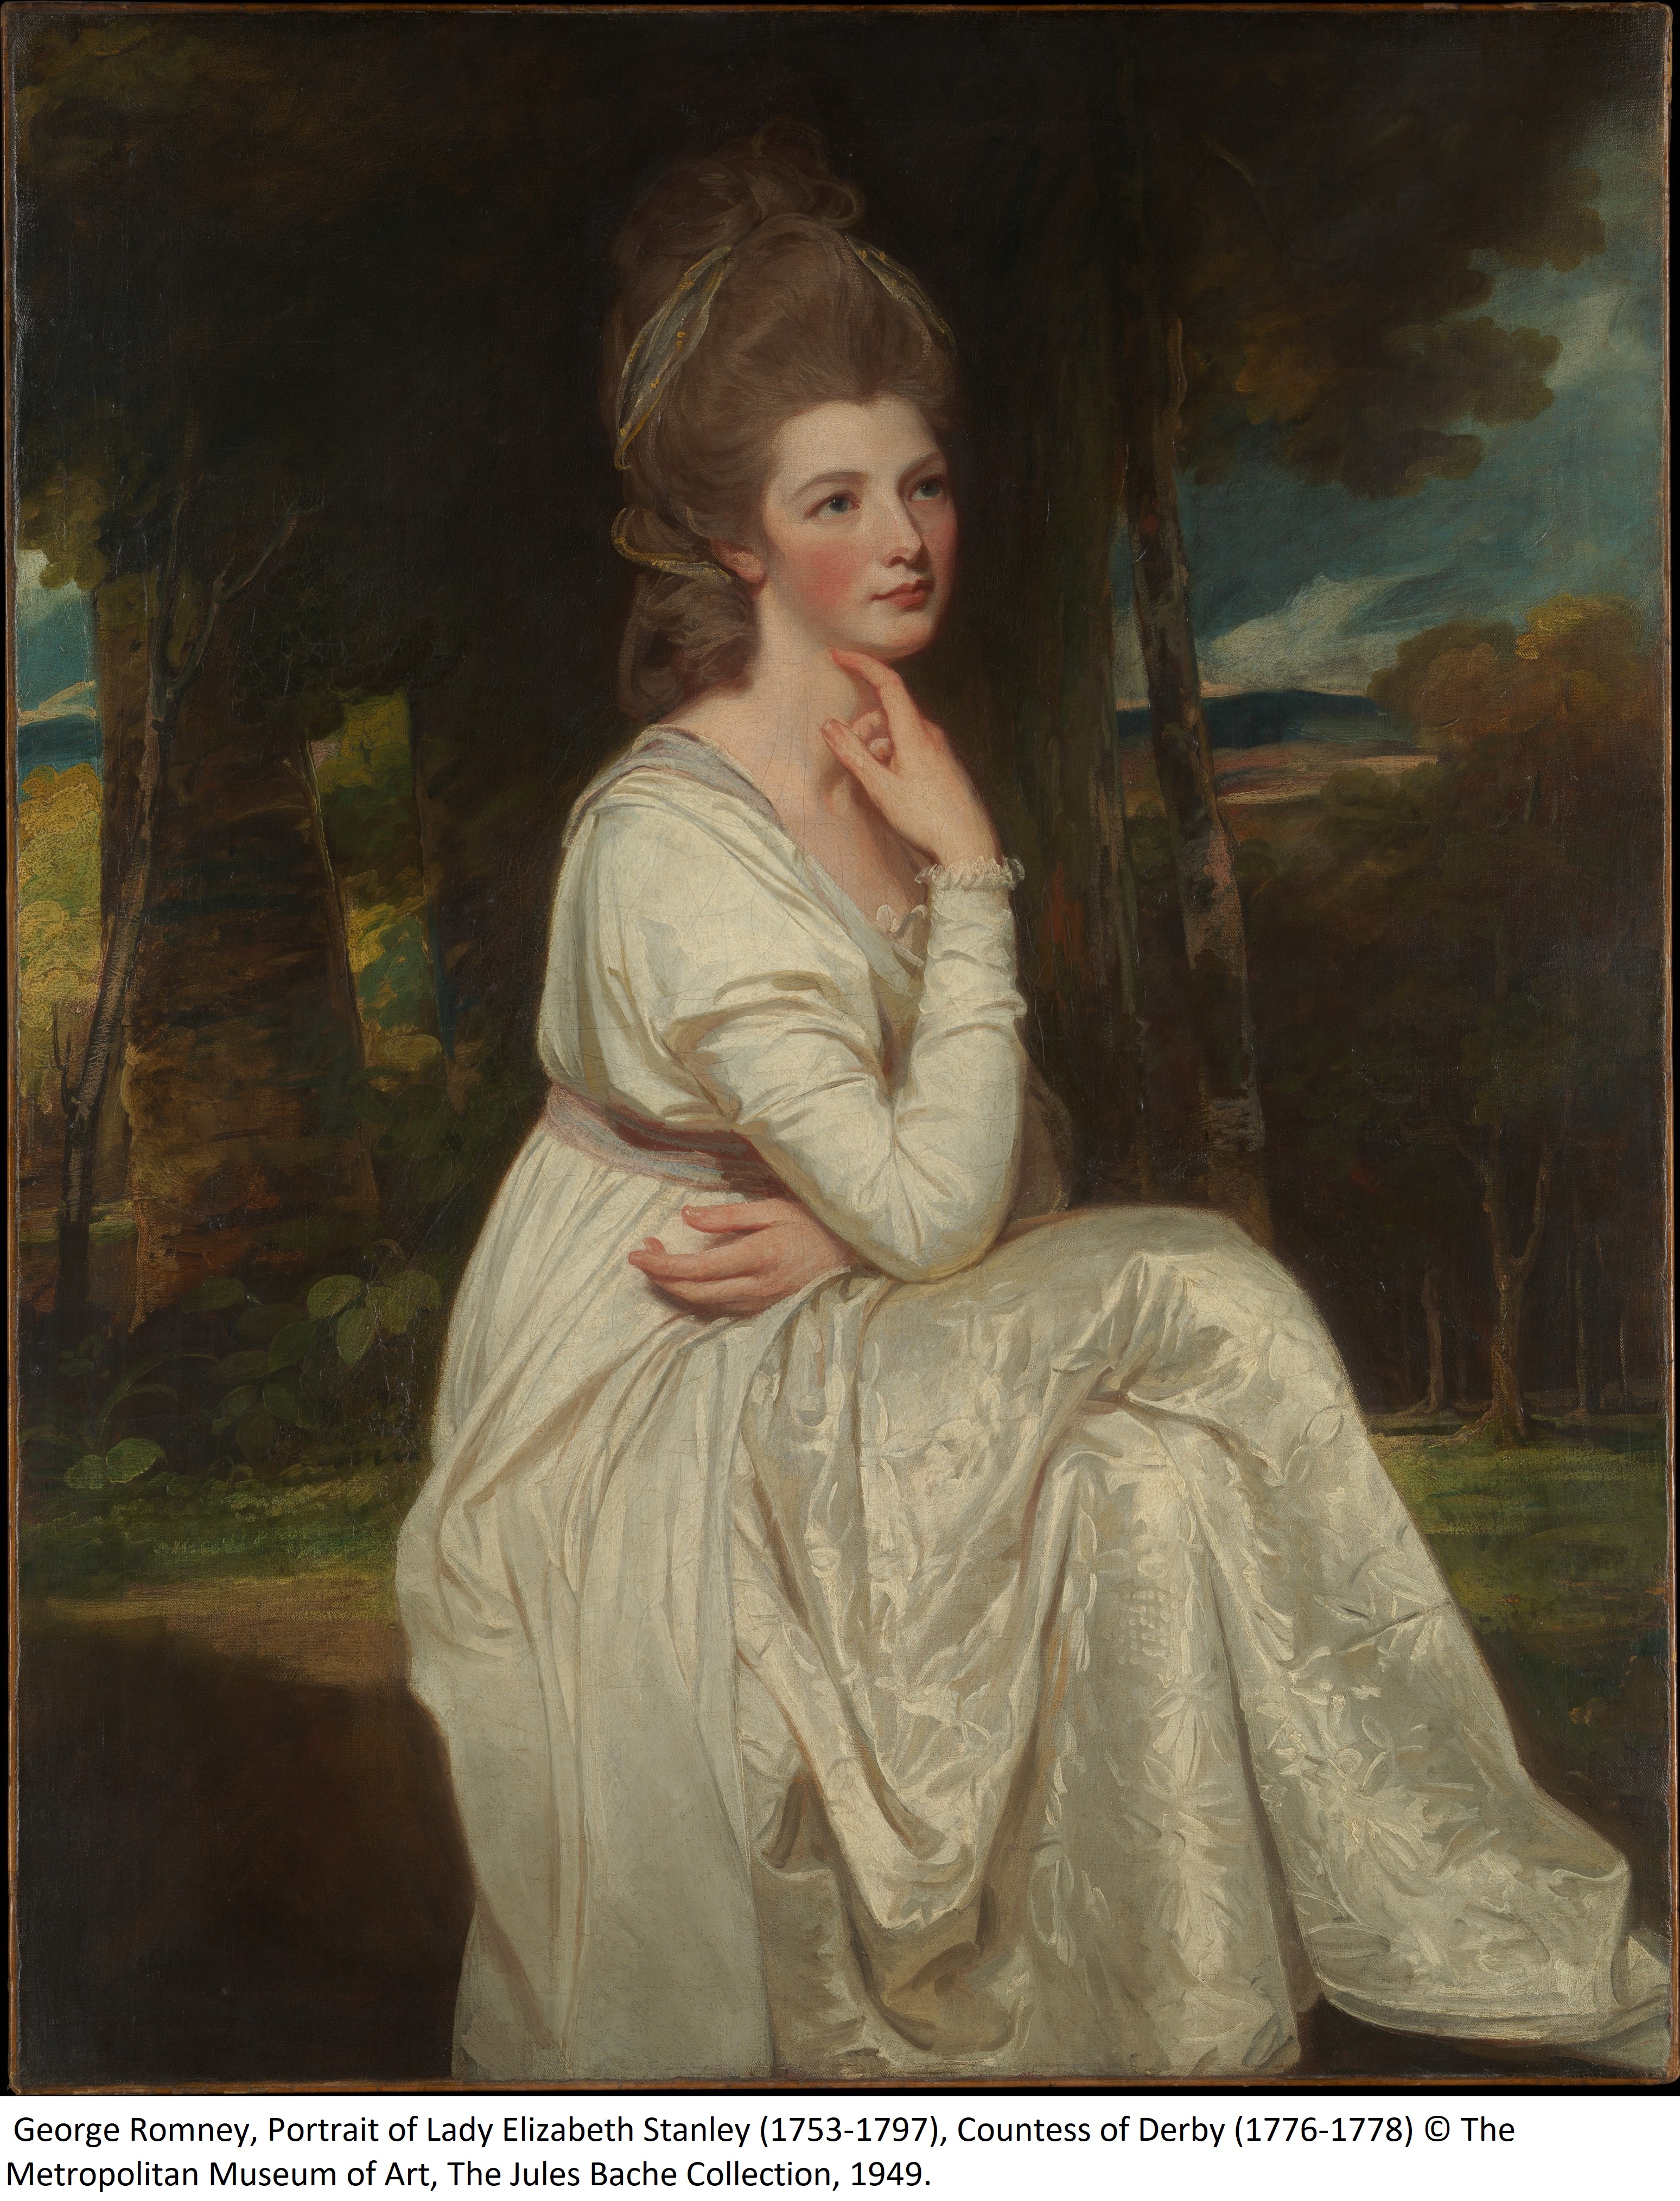  George Romney, Portrait of Lady Elizabeth Stanley (1753-1797), Countess of Derby (1776-1778) © The Metropolitan Museum of Art, The Jules Bache Collection, 1949.